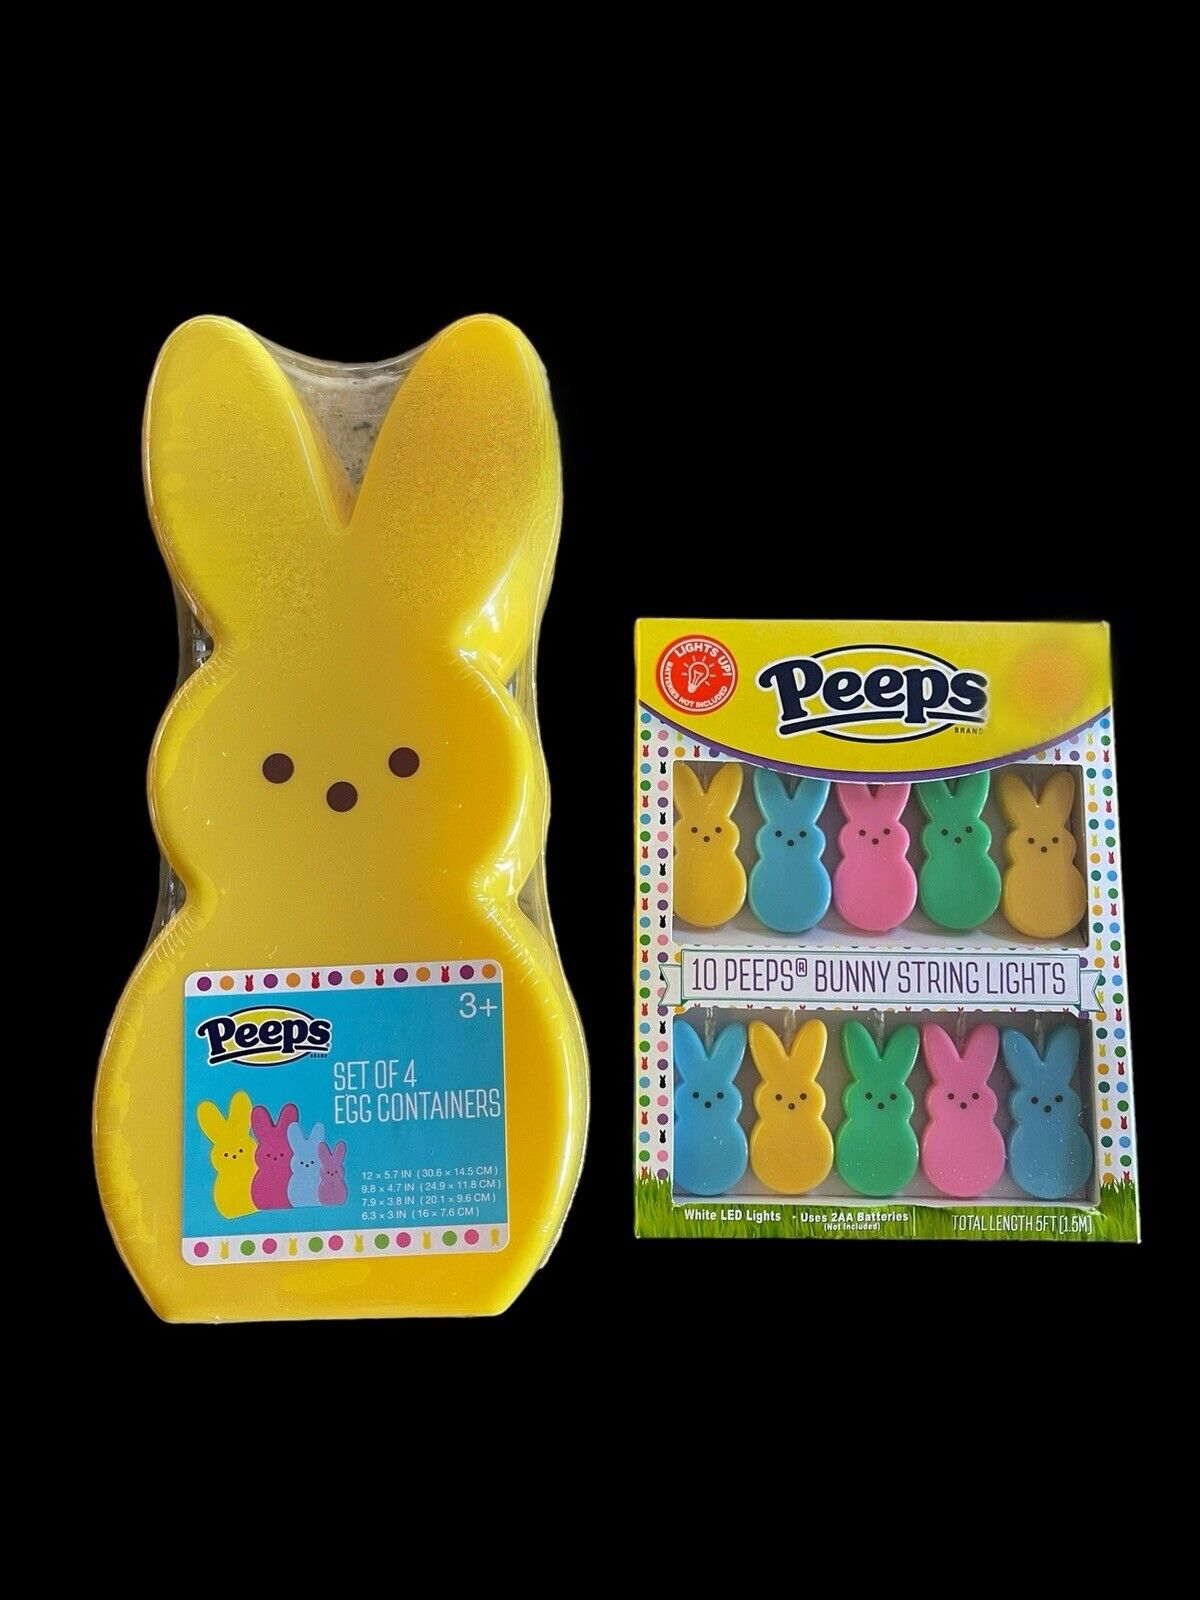 4 Peeps Bunny Egg Candy Nesting Containers & LED String Light Set Decor NEW HTF